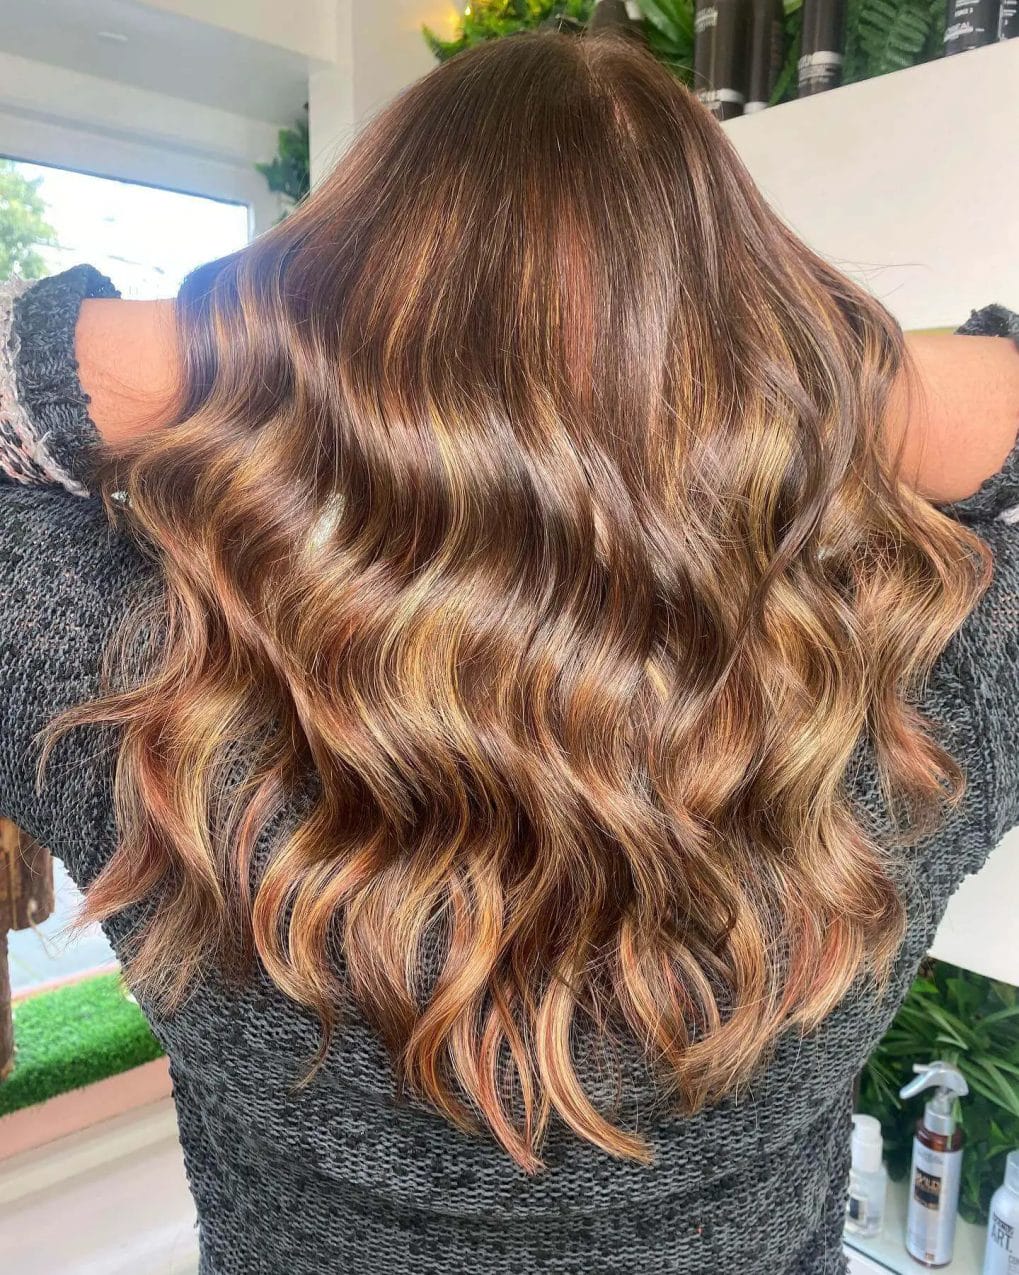 Golden and caramel balayage in rich brunette, reminiscent of winter sunlight.